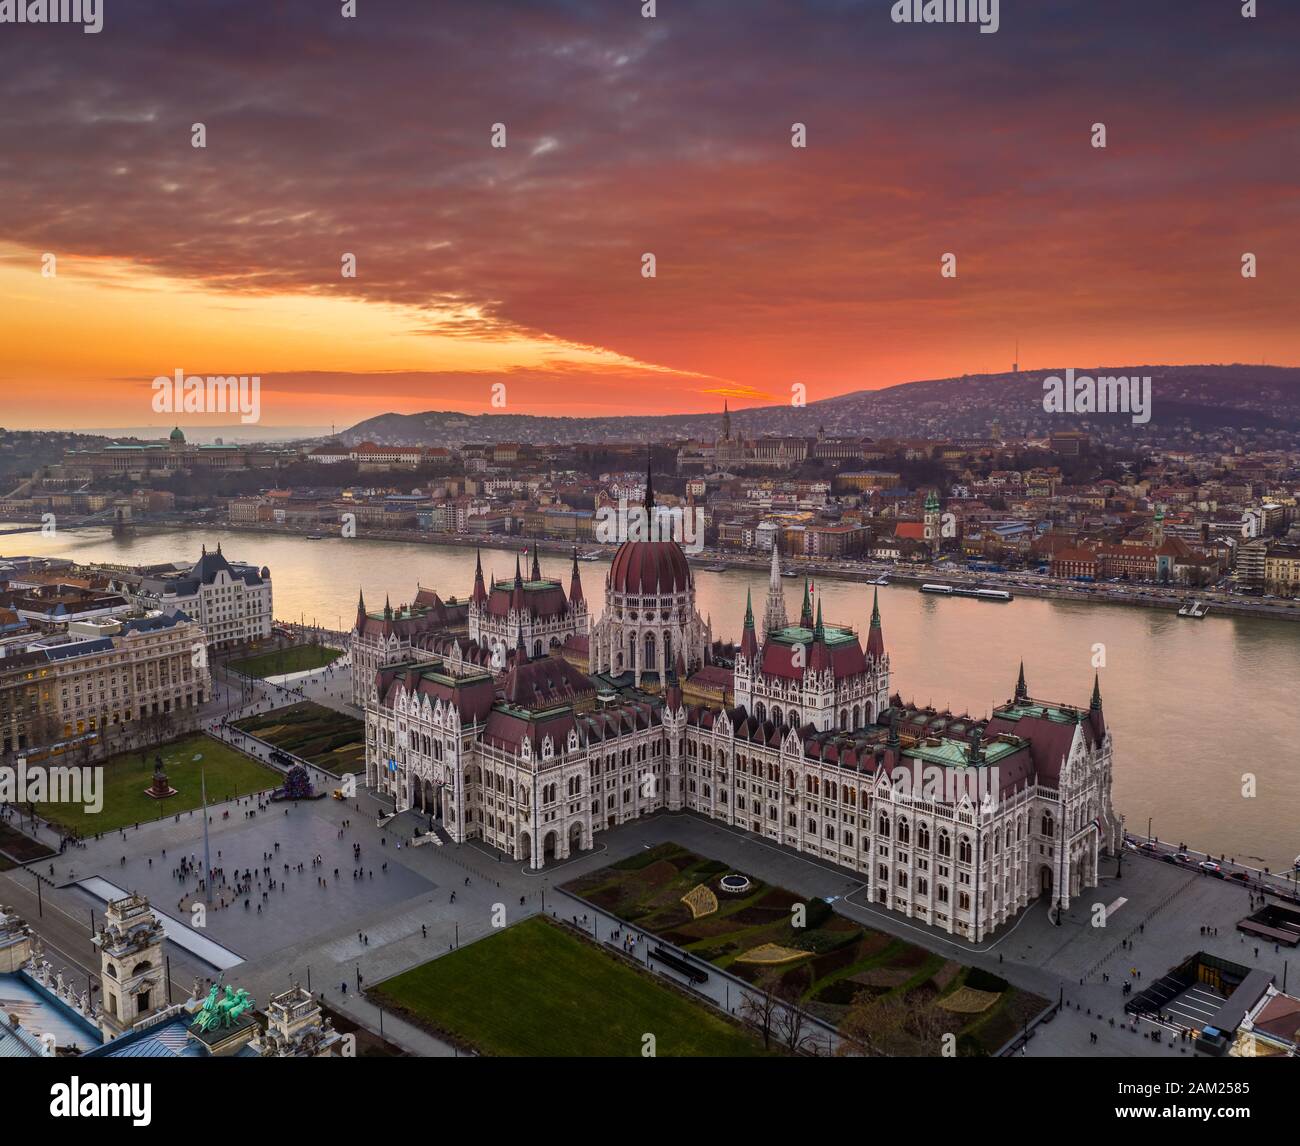 Budapest, Hungary - Aerial view of the Hungarian Parliament building on a winter afternoon with a spectacular colorful sunset. Fisherman's Bastion, Bu Stock Photo